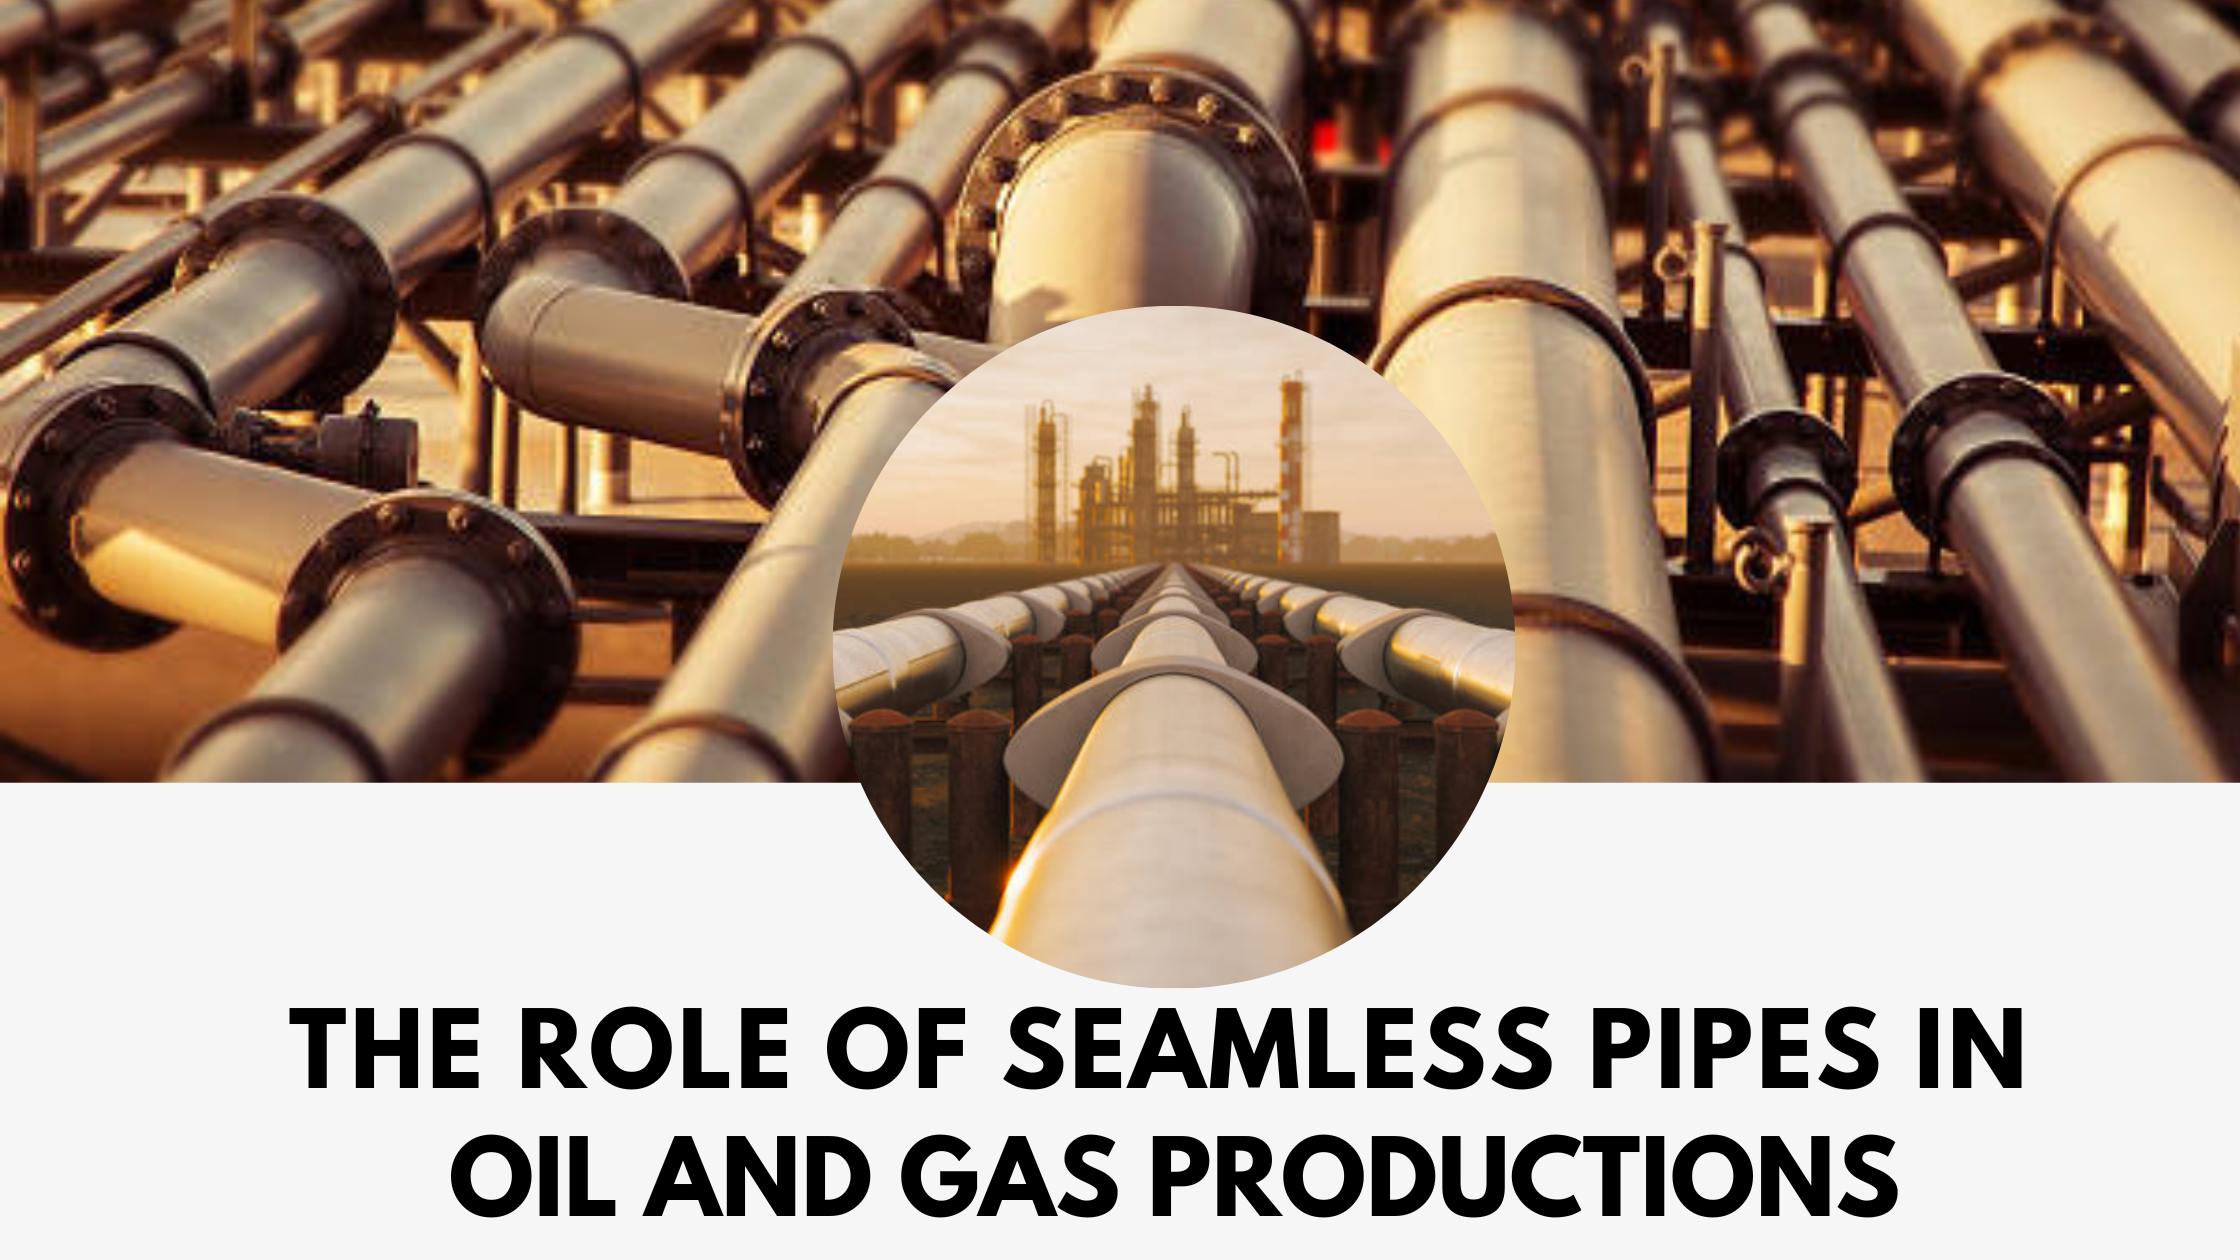 The Role of Seamless Pipes in Oil and Gas Production